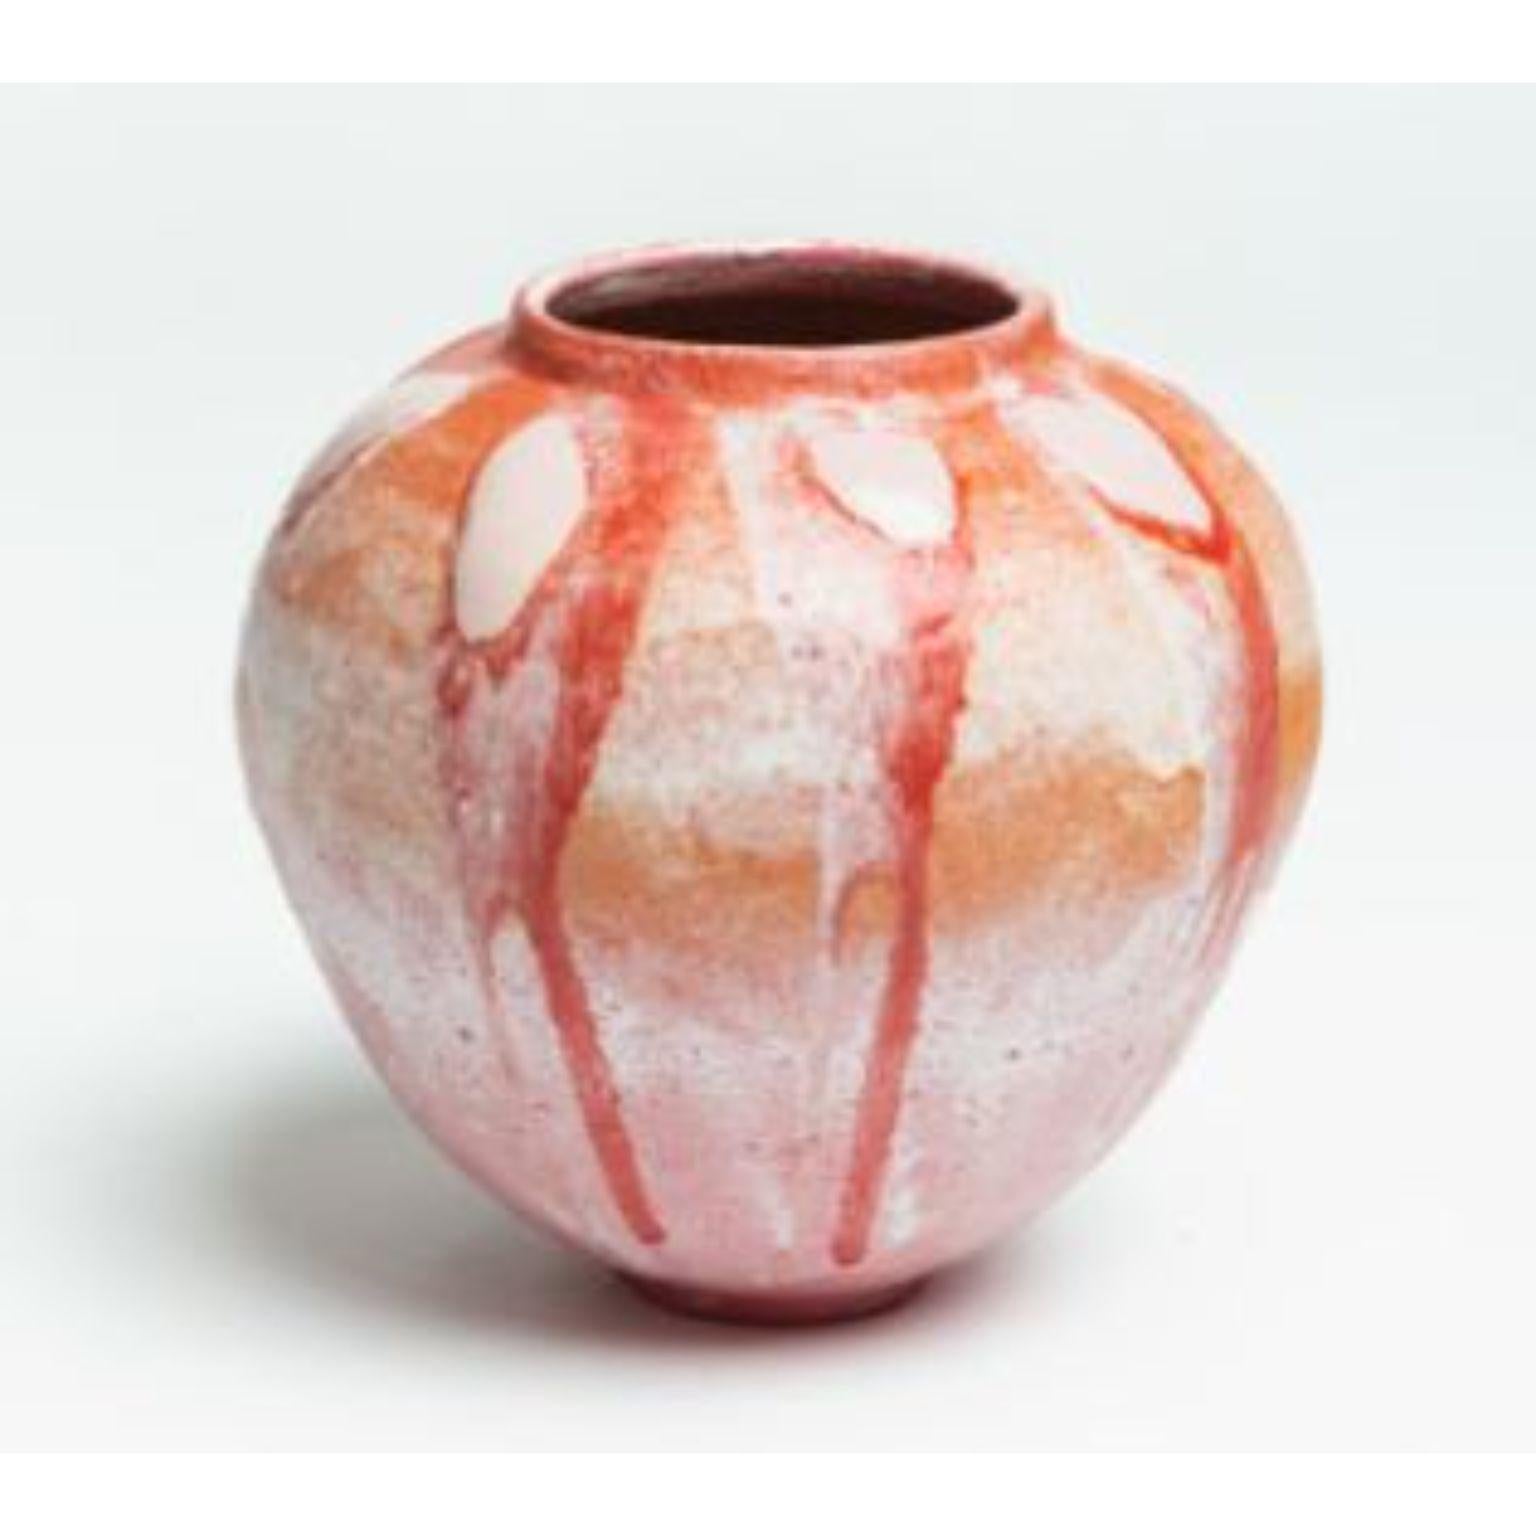 Sunset Moon vase by Arina Antonova
Dimensions: H 33 x D 33 cm
Materials: Stoneware, porcelain, glaze.

Born in Sewastopol (Crimea), I was surrounded by the natural variety of the coastal Black Sea views with rocky beaches and picturesque